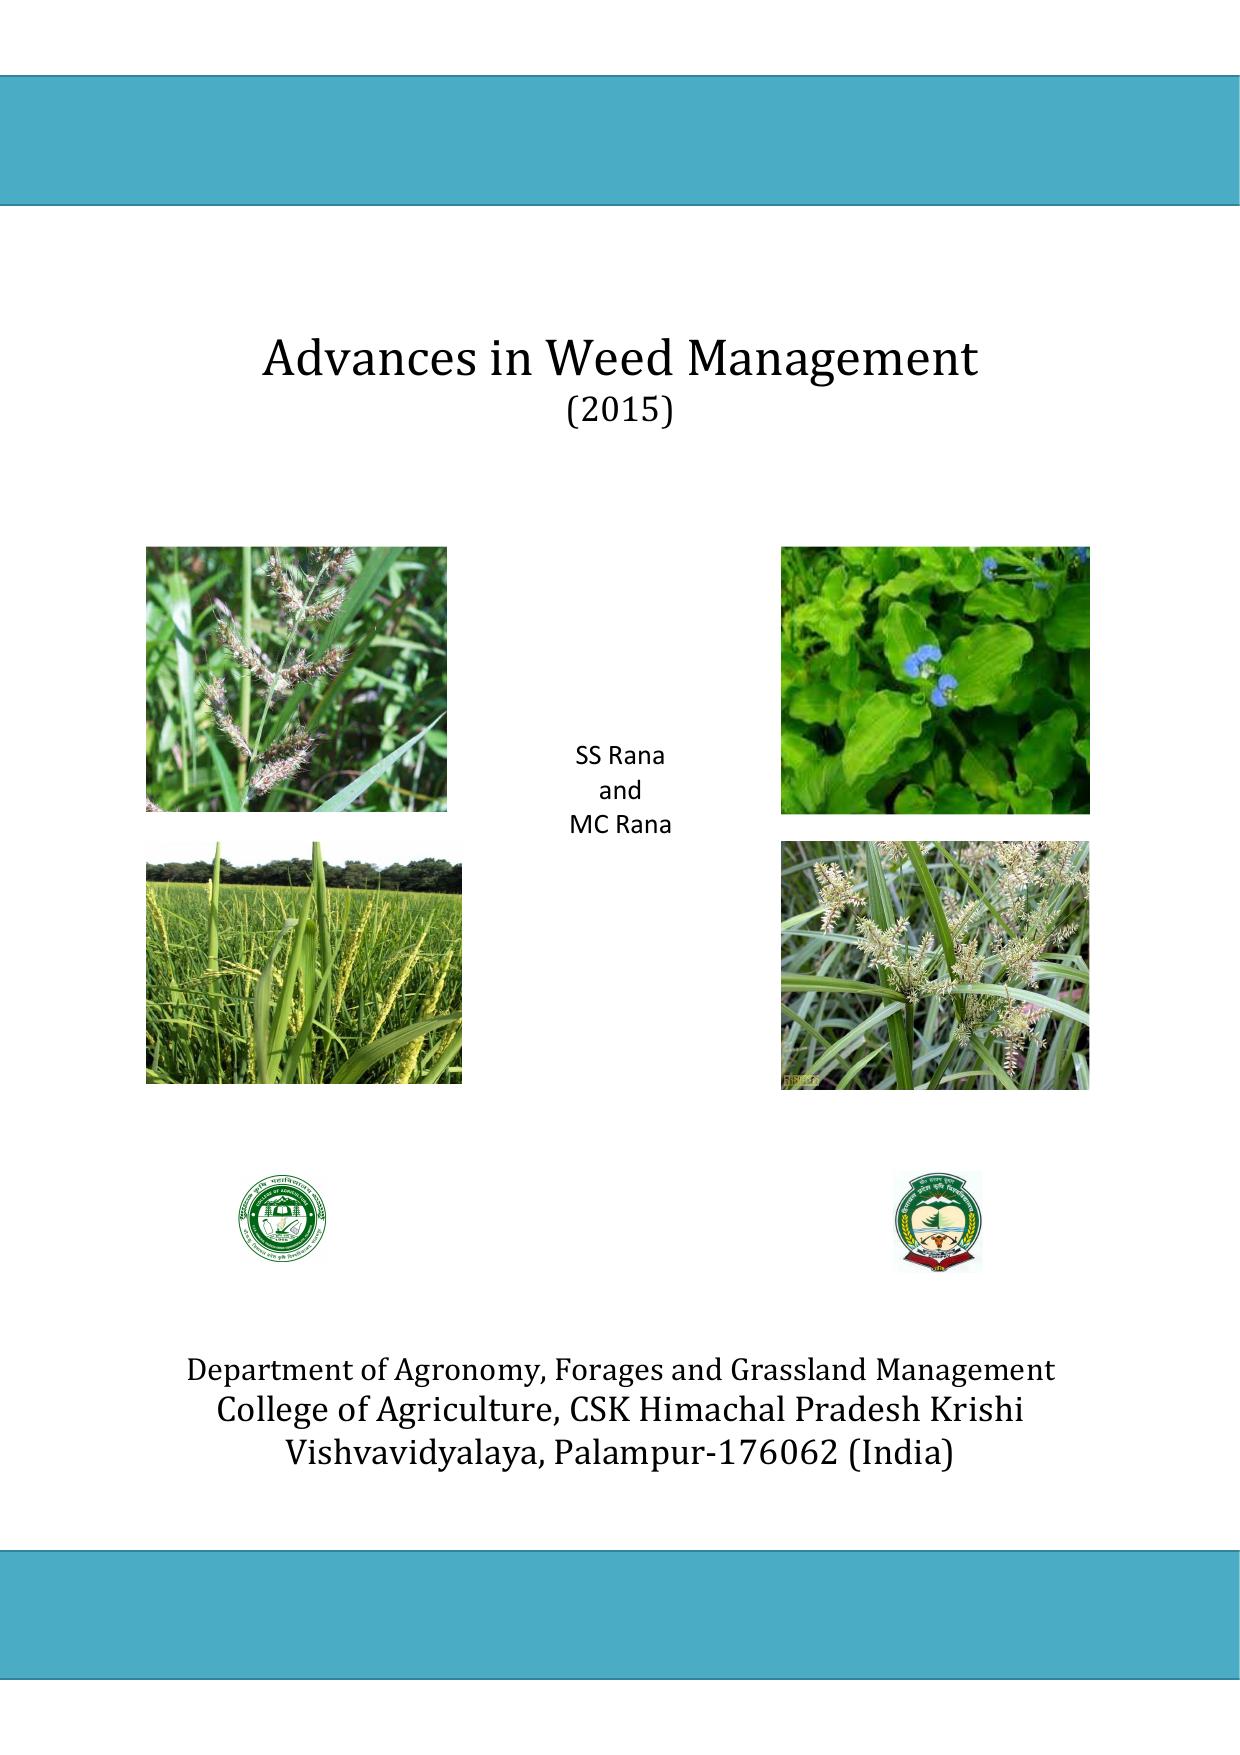 Advances-in-Weed-Management-2015